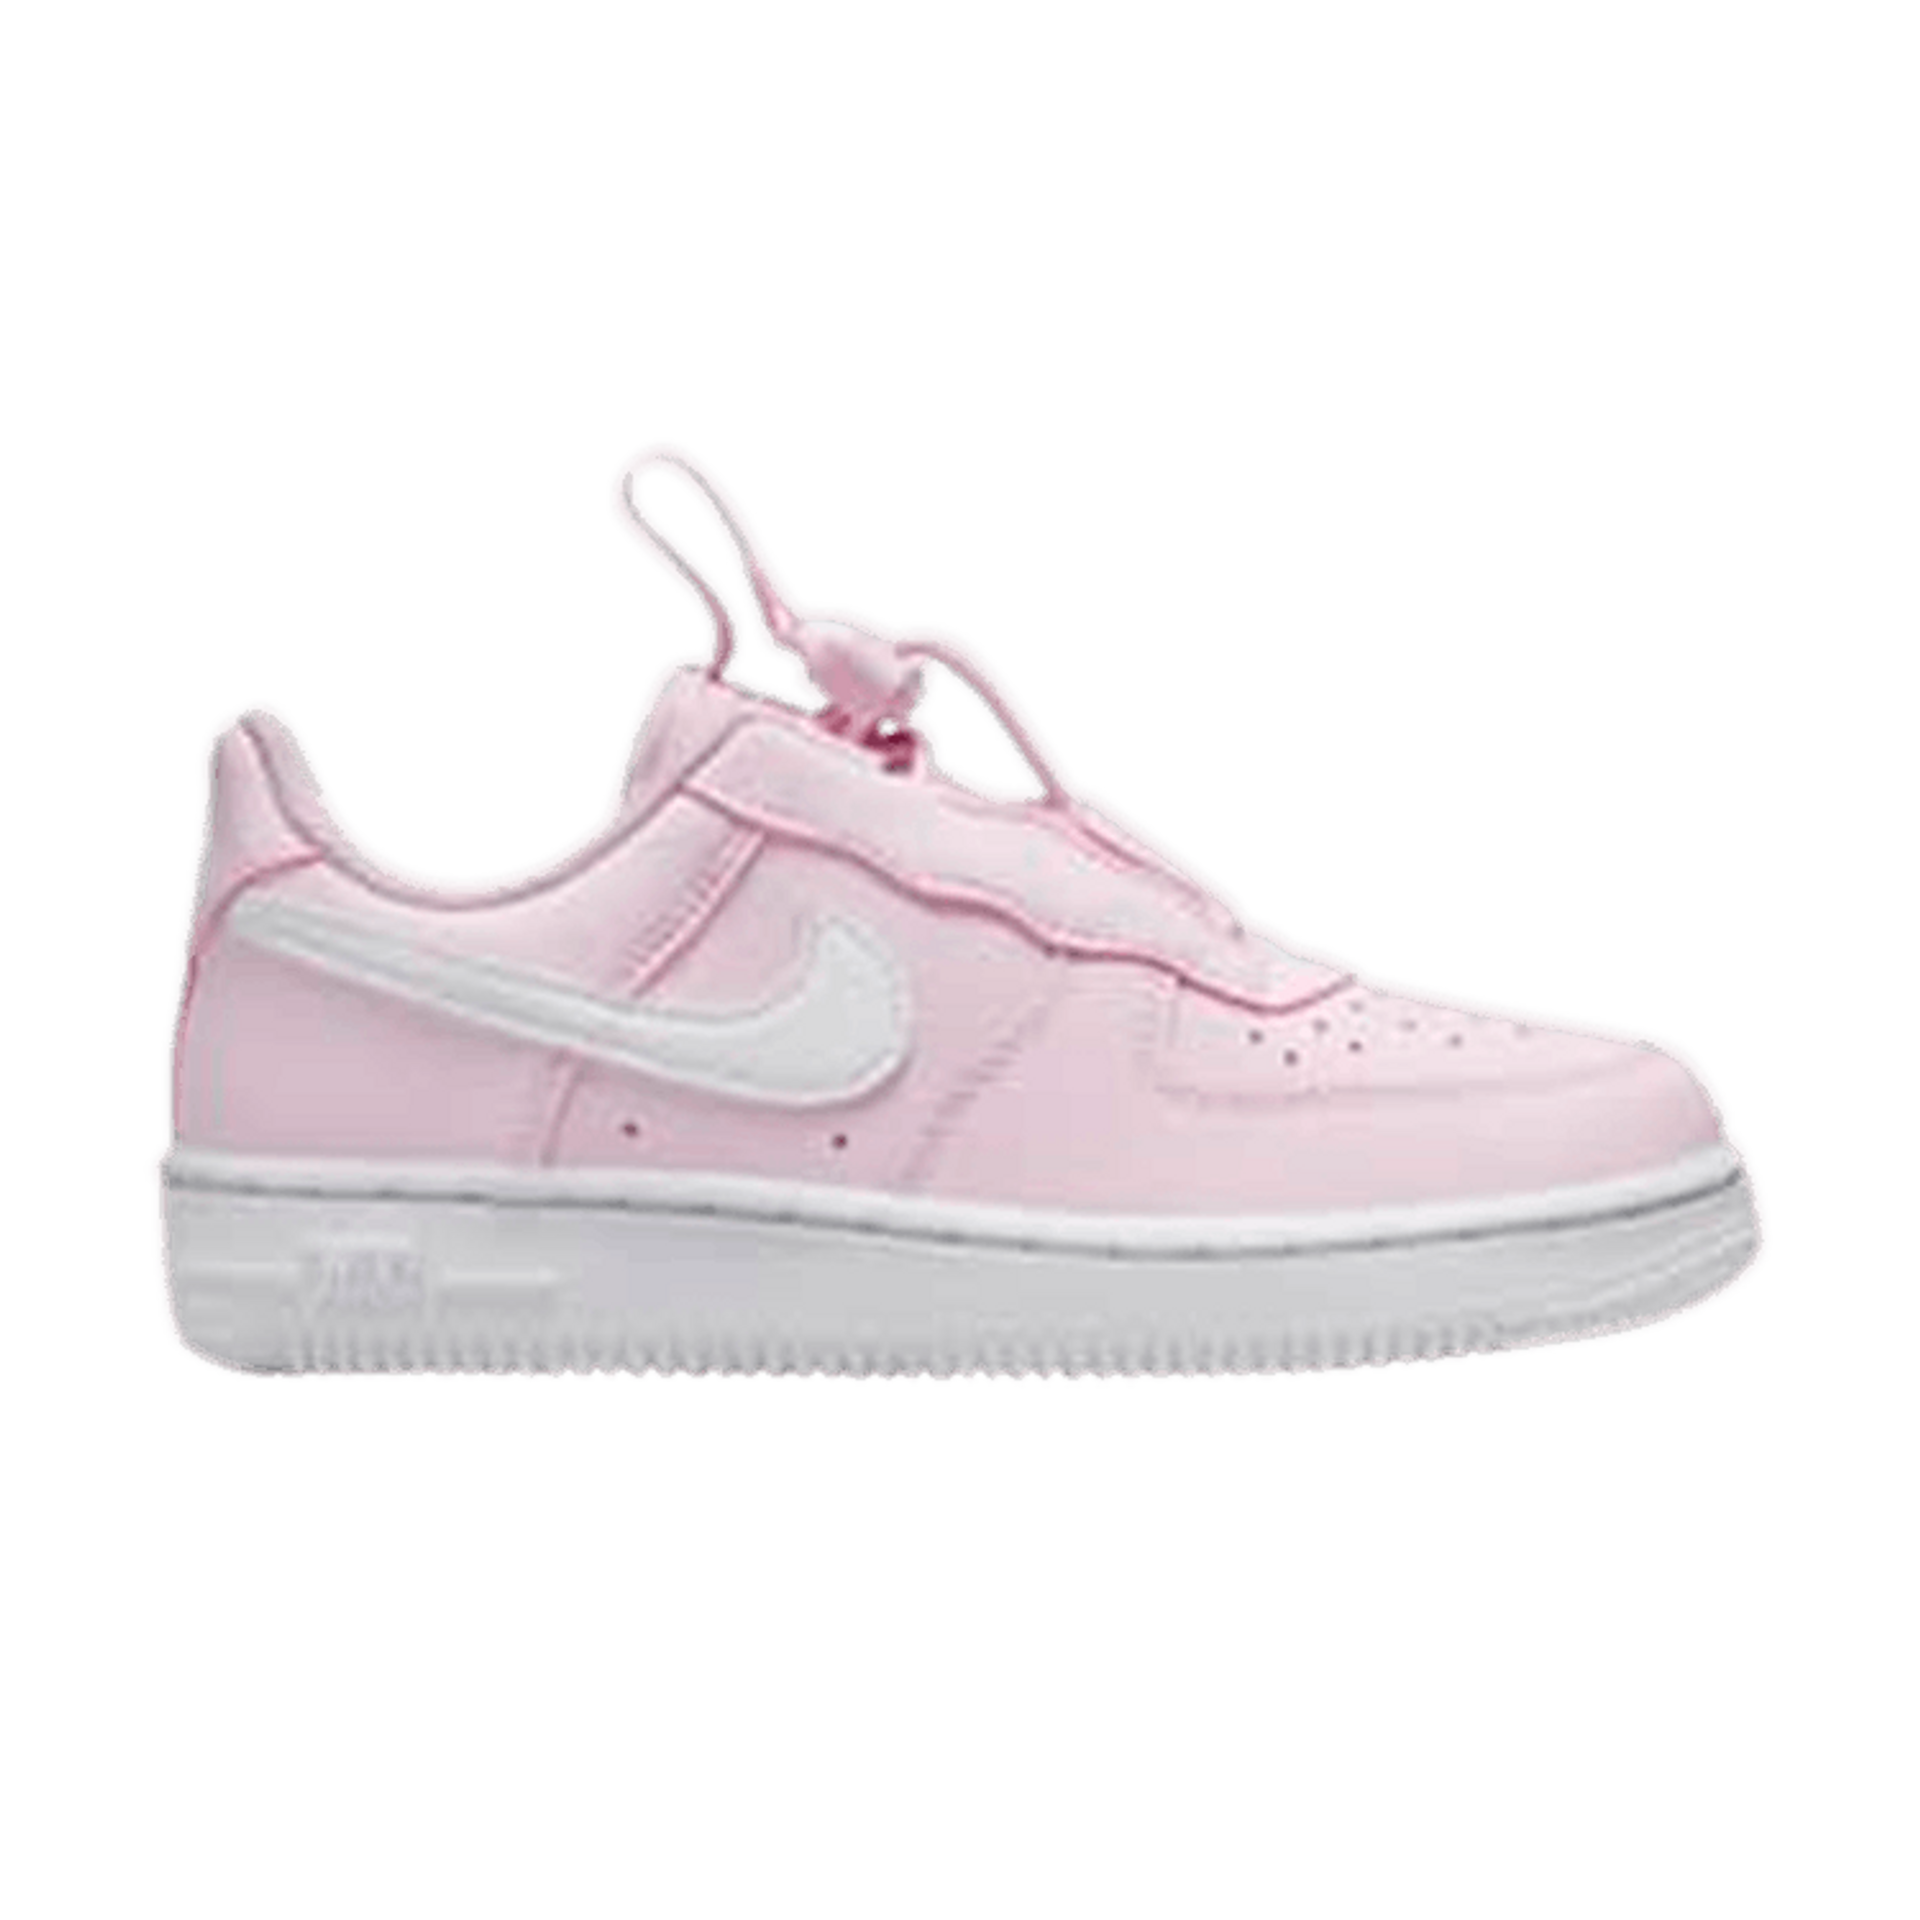 Force 1 Toggle PS 'Pink Foam'